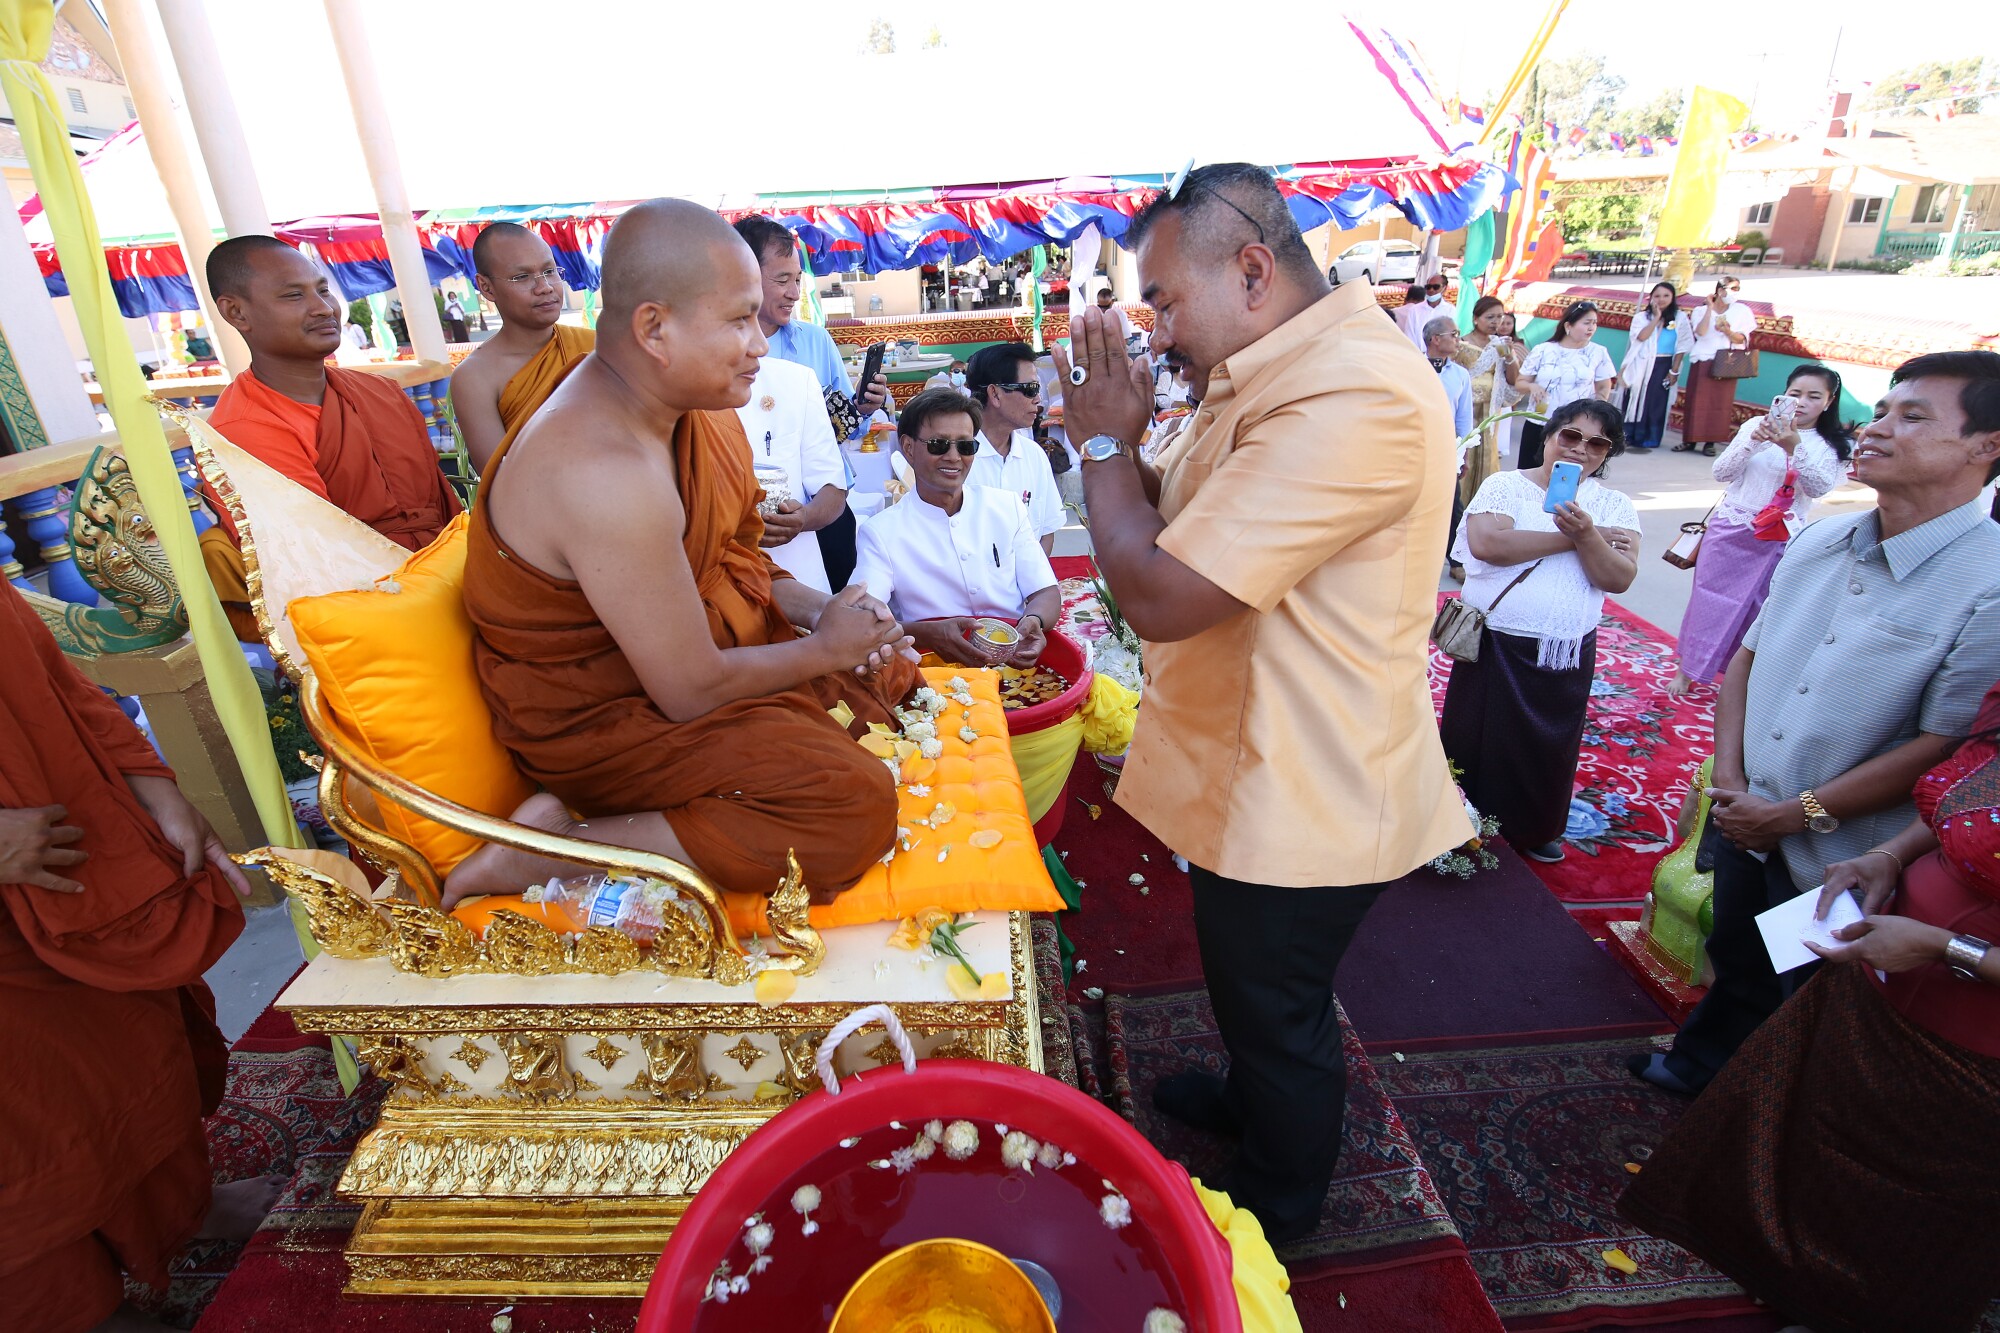 Danny Kim, right, gets a blessing from the temple abbot, Say Bunthon, left.